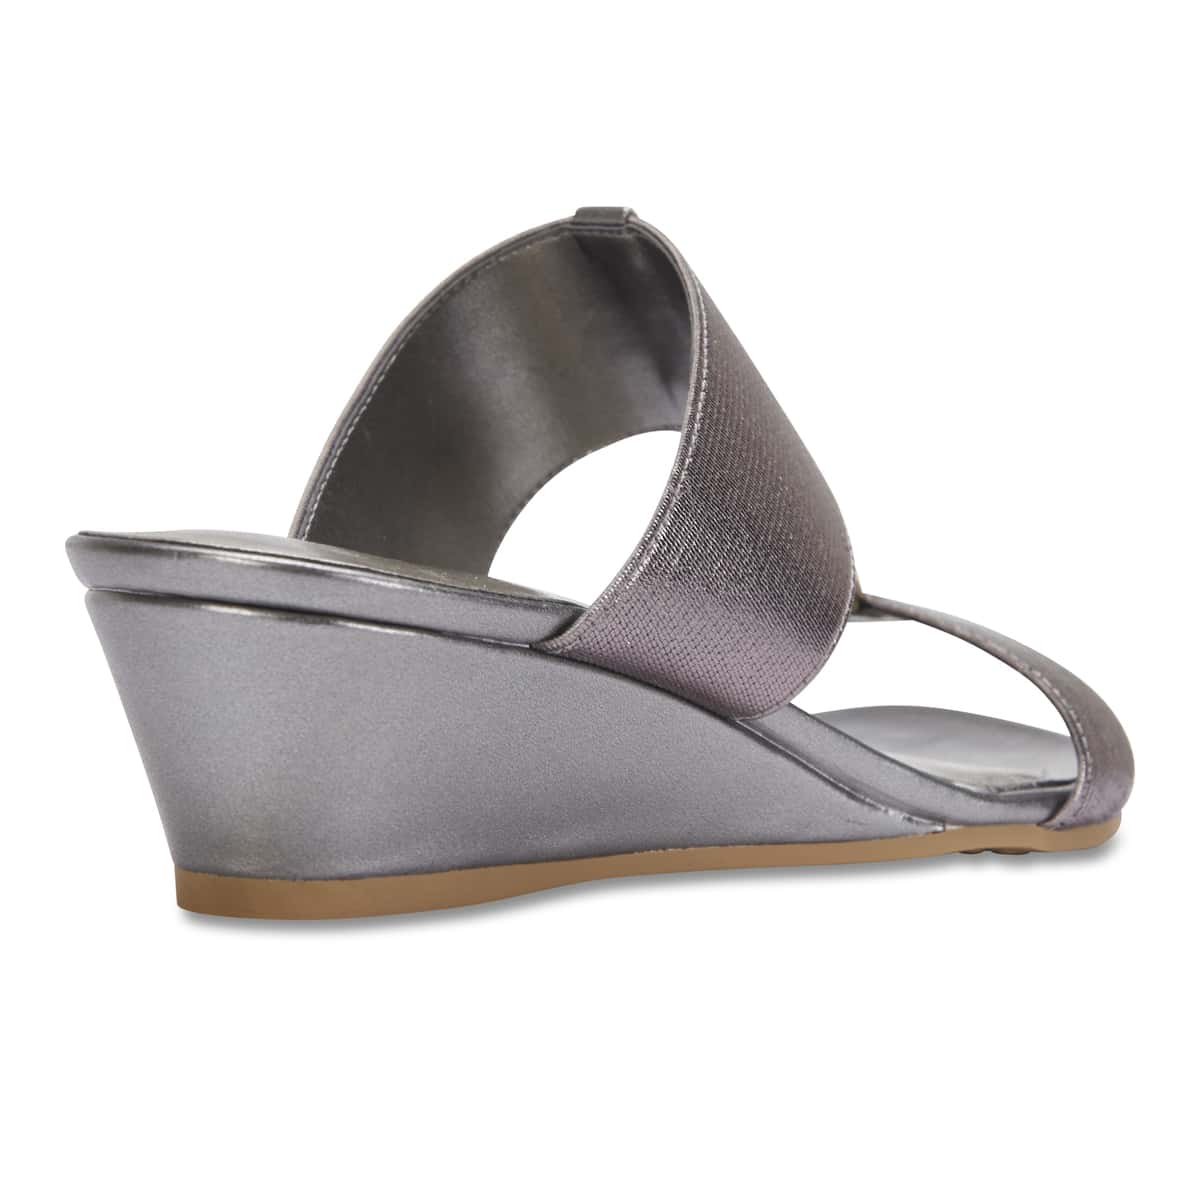 Claire Heel in Pewter Fabric